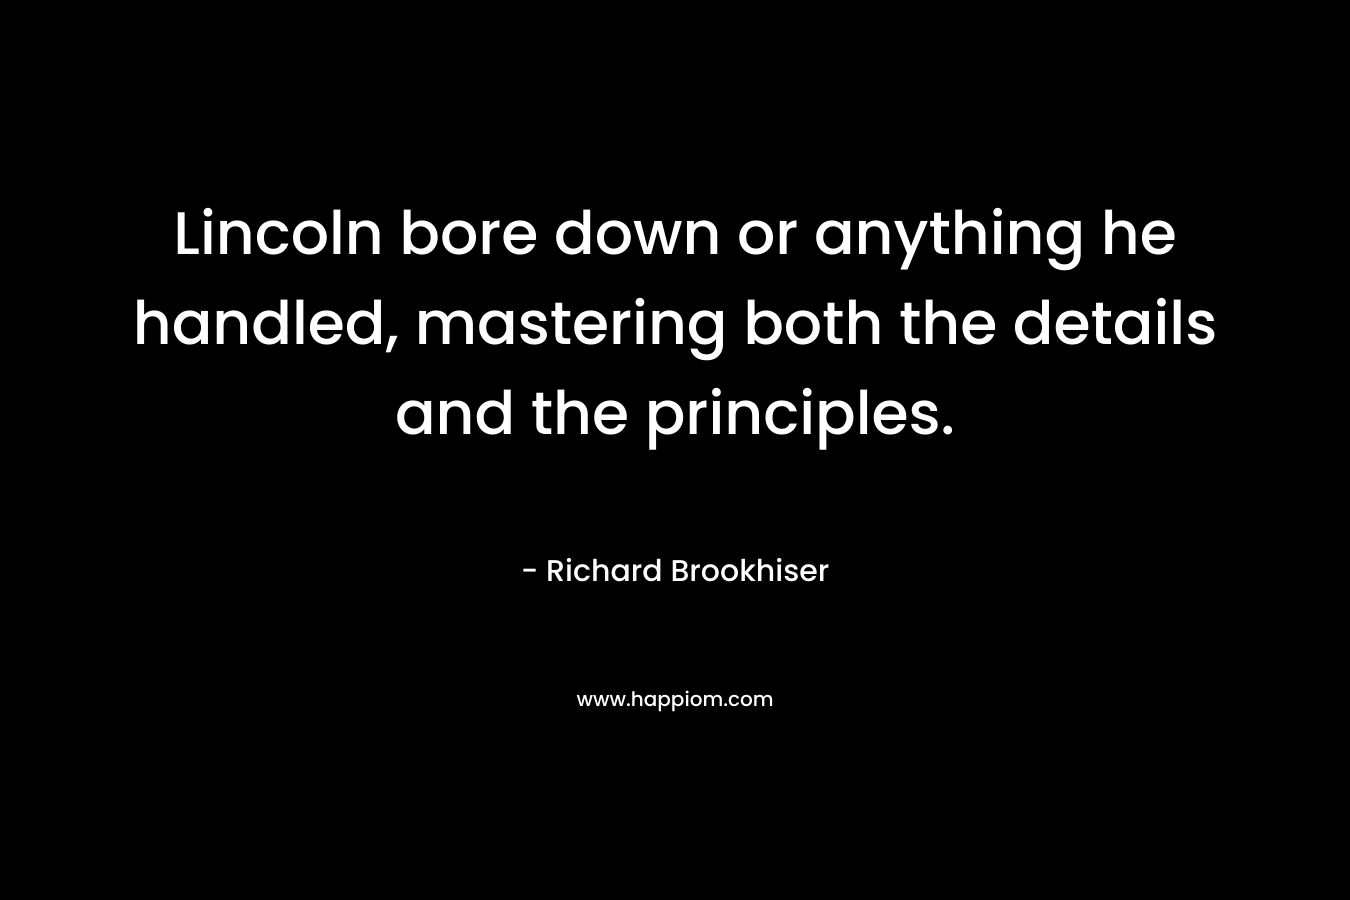 Lincoln bore down or anything he handled, mastering both the details and the principles. – Richard Brookhiser